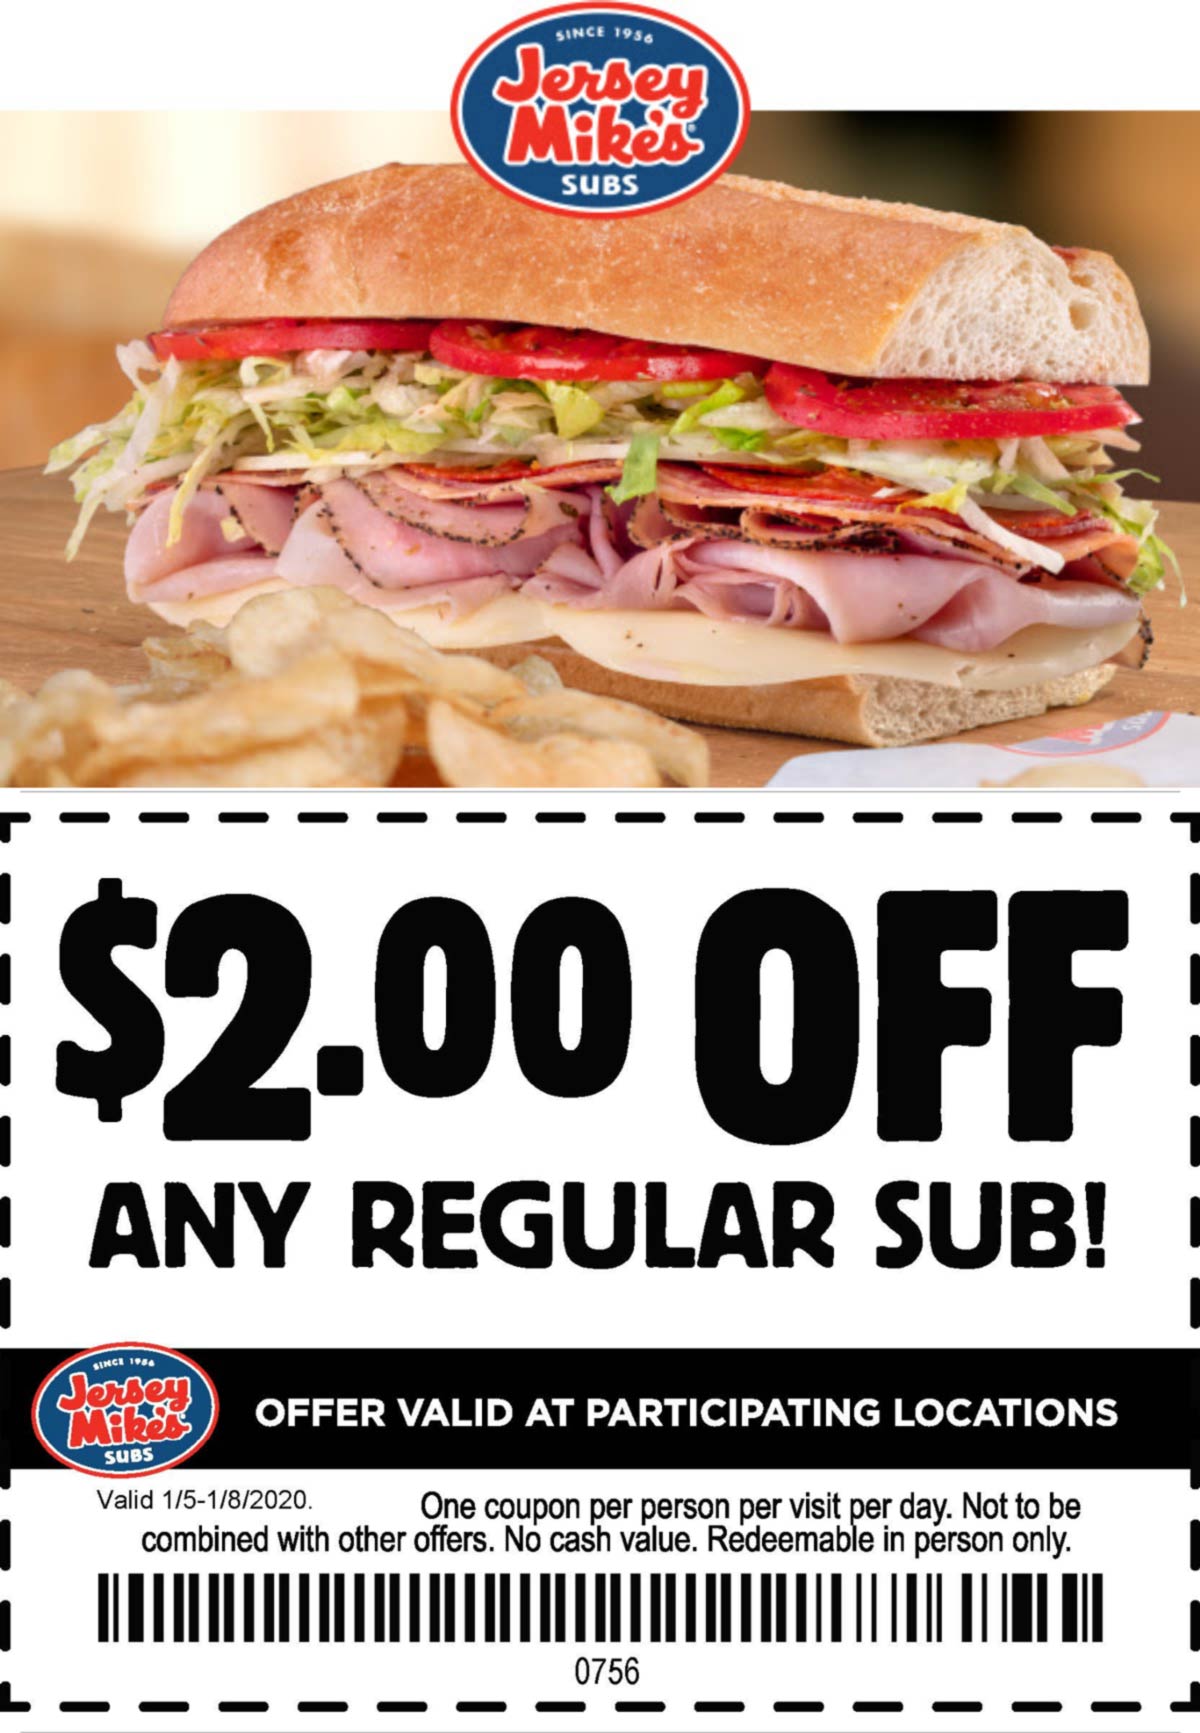 2-off-a-sub-sandwich-at-jersey-mikes-jerseymikes-the-coupons-app